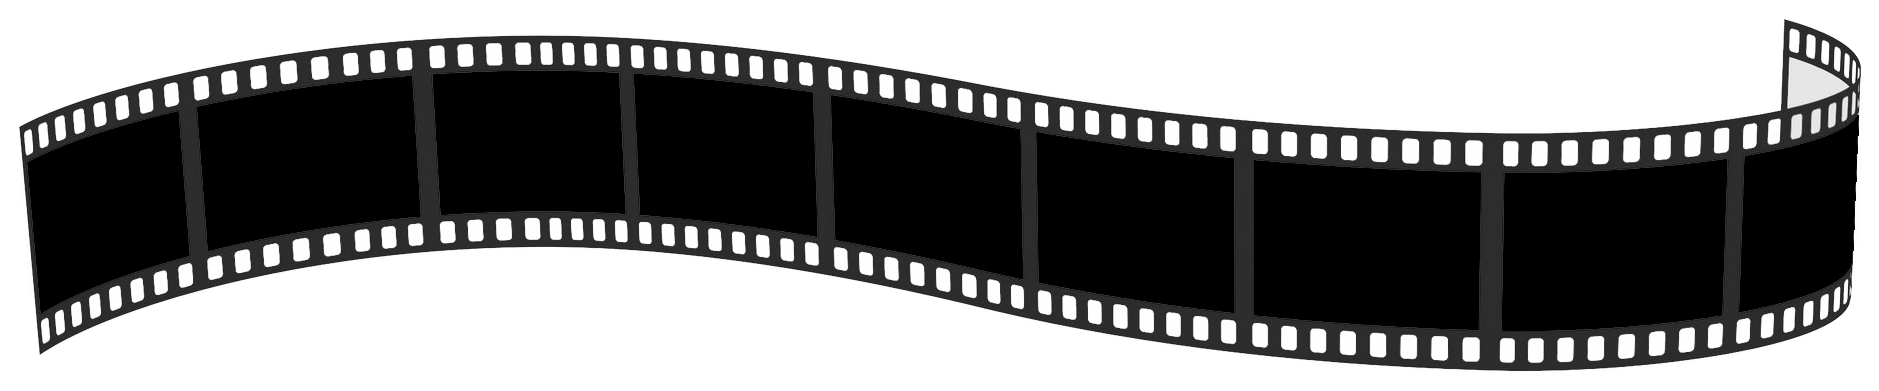 Reel High Quality Channel Film PNG